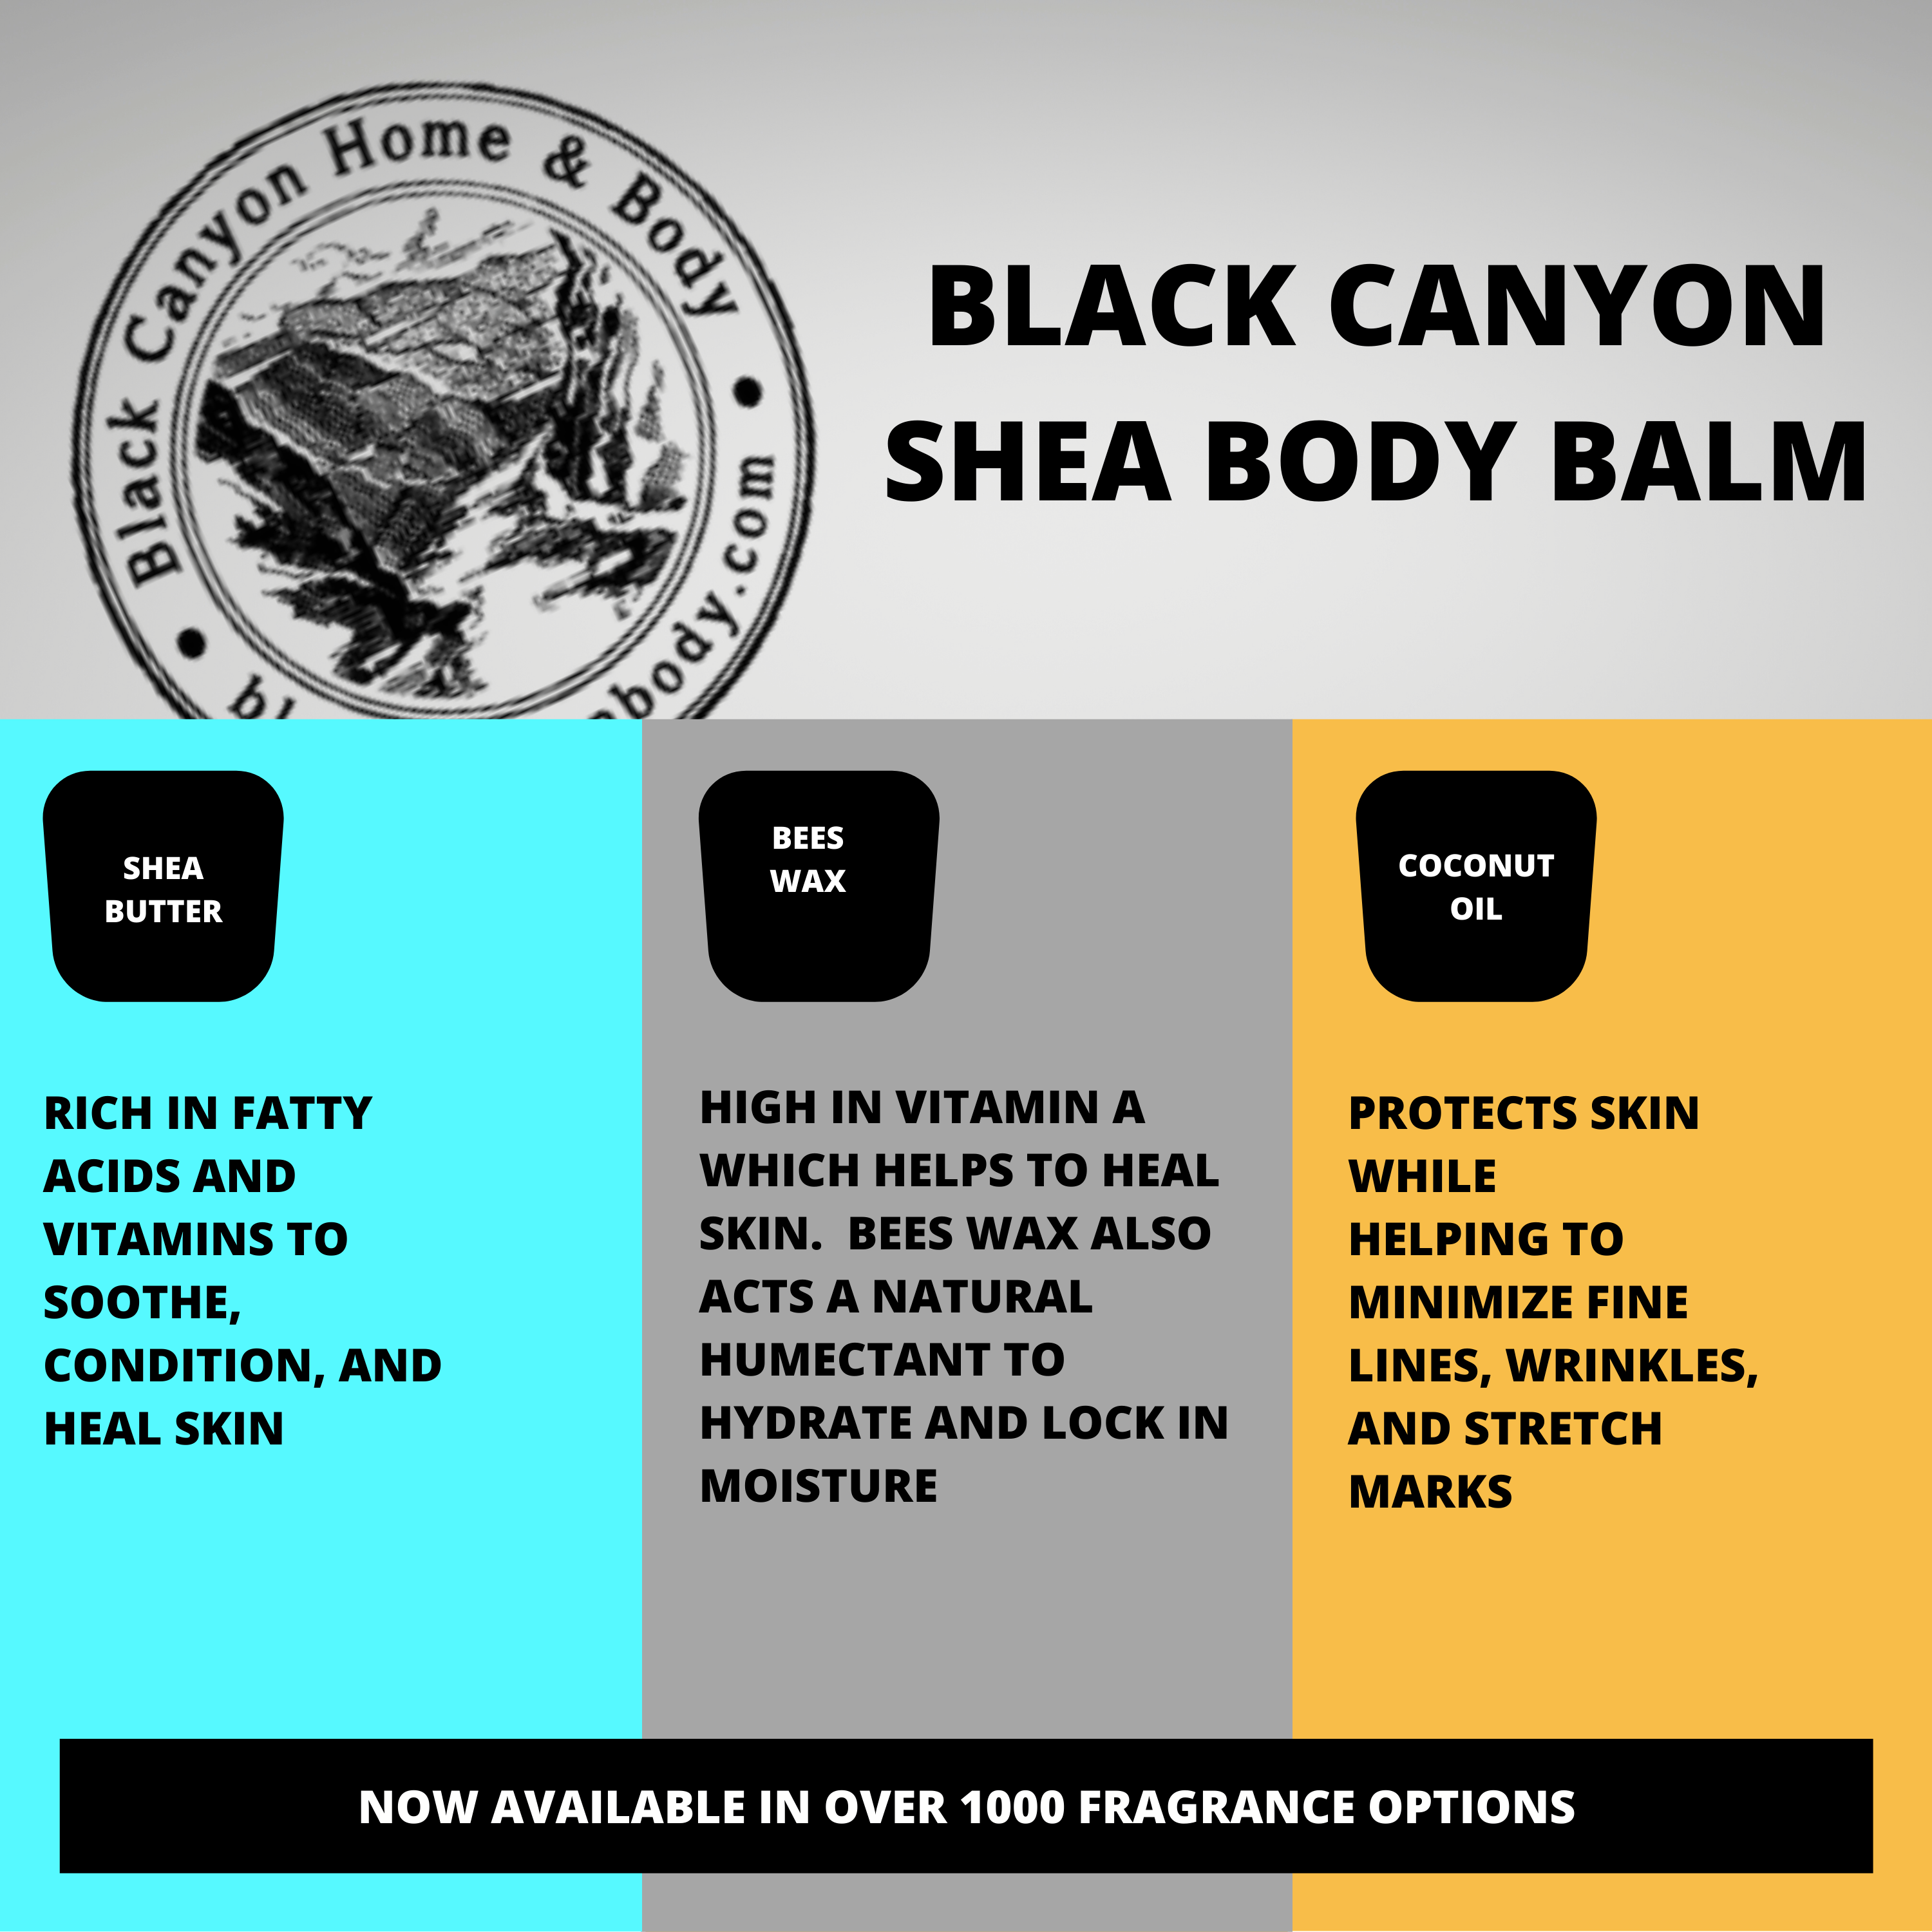 Black Canyon Lemon & Sugared Rose Scented Natural Body Balm with Shea